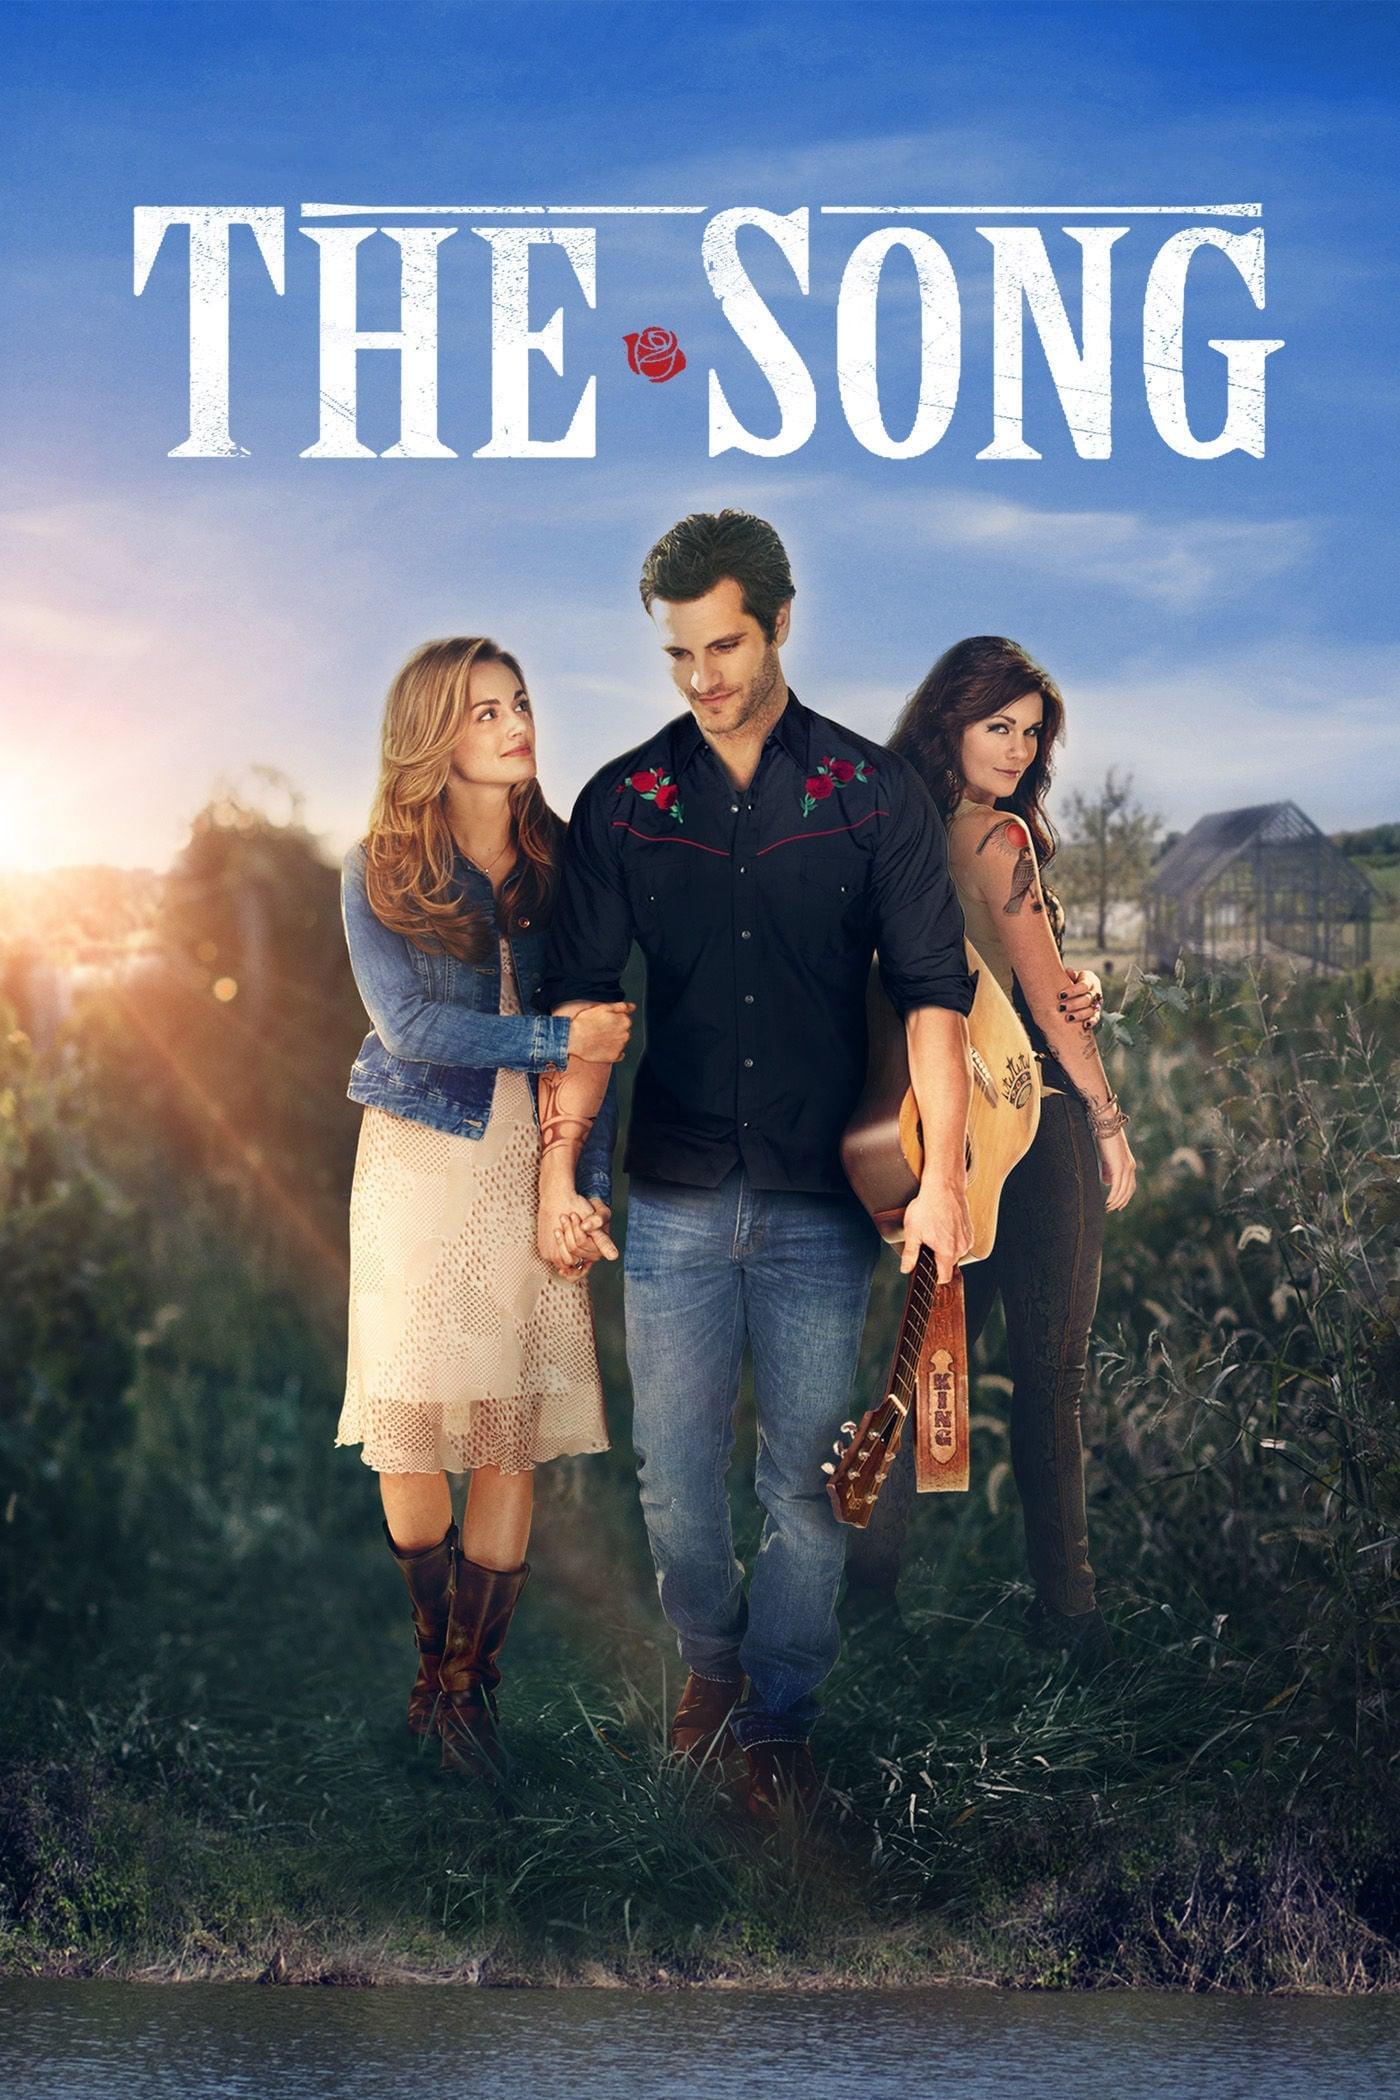 The Song poster